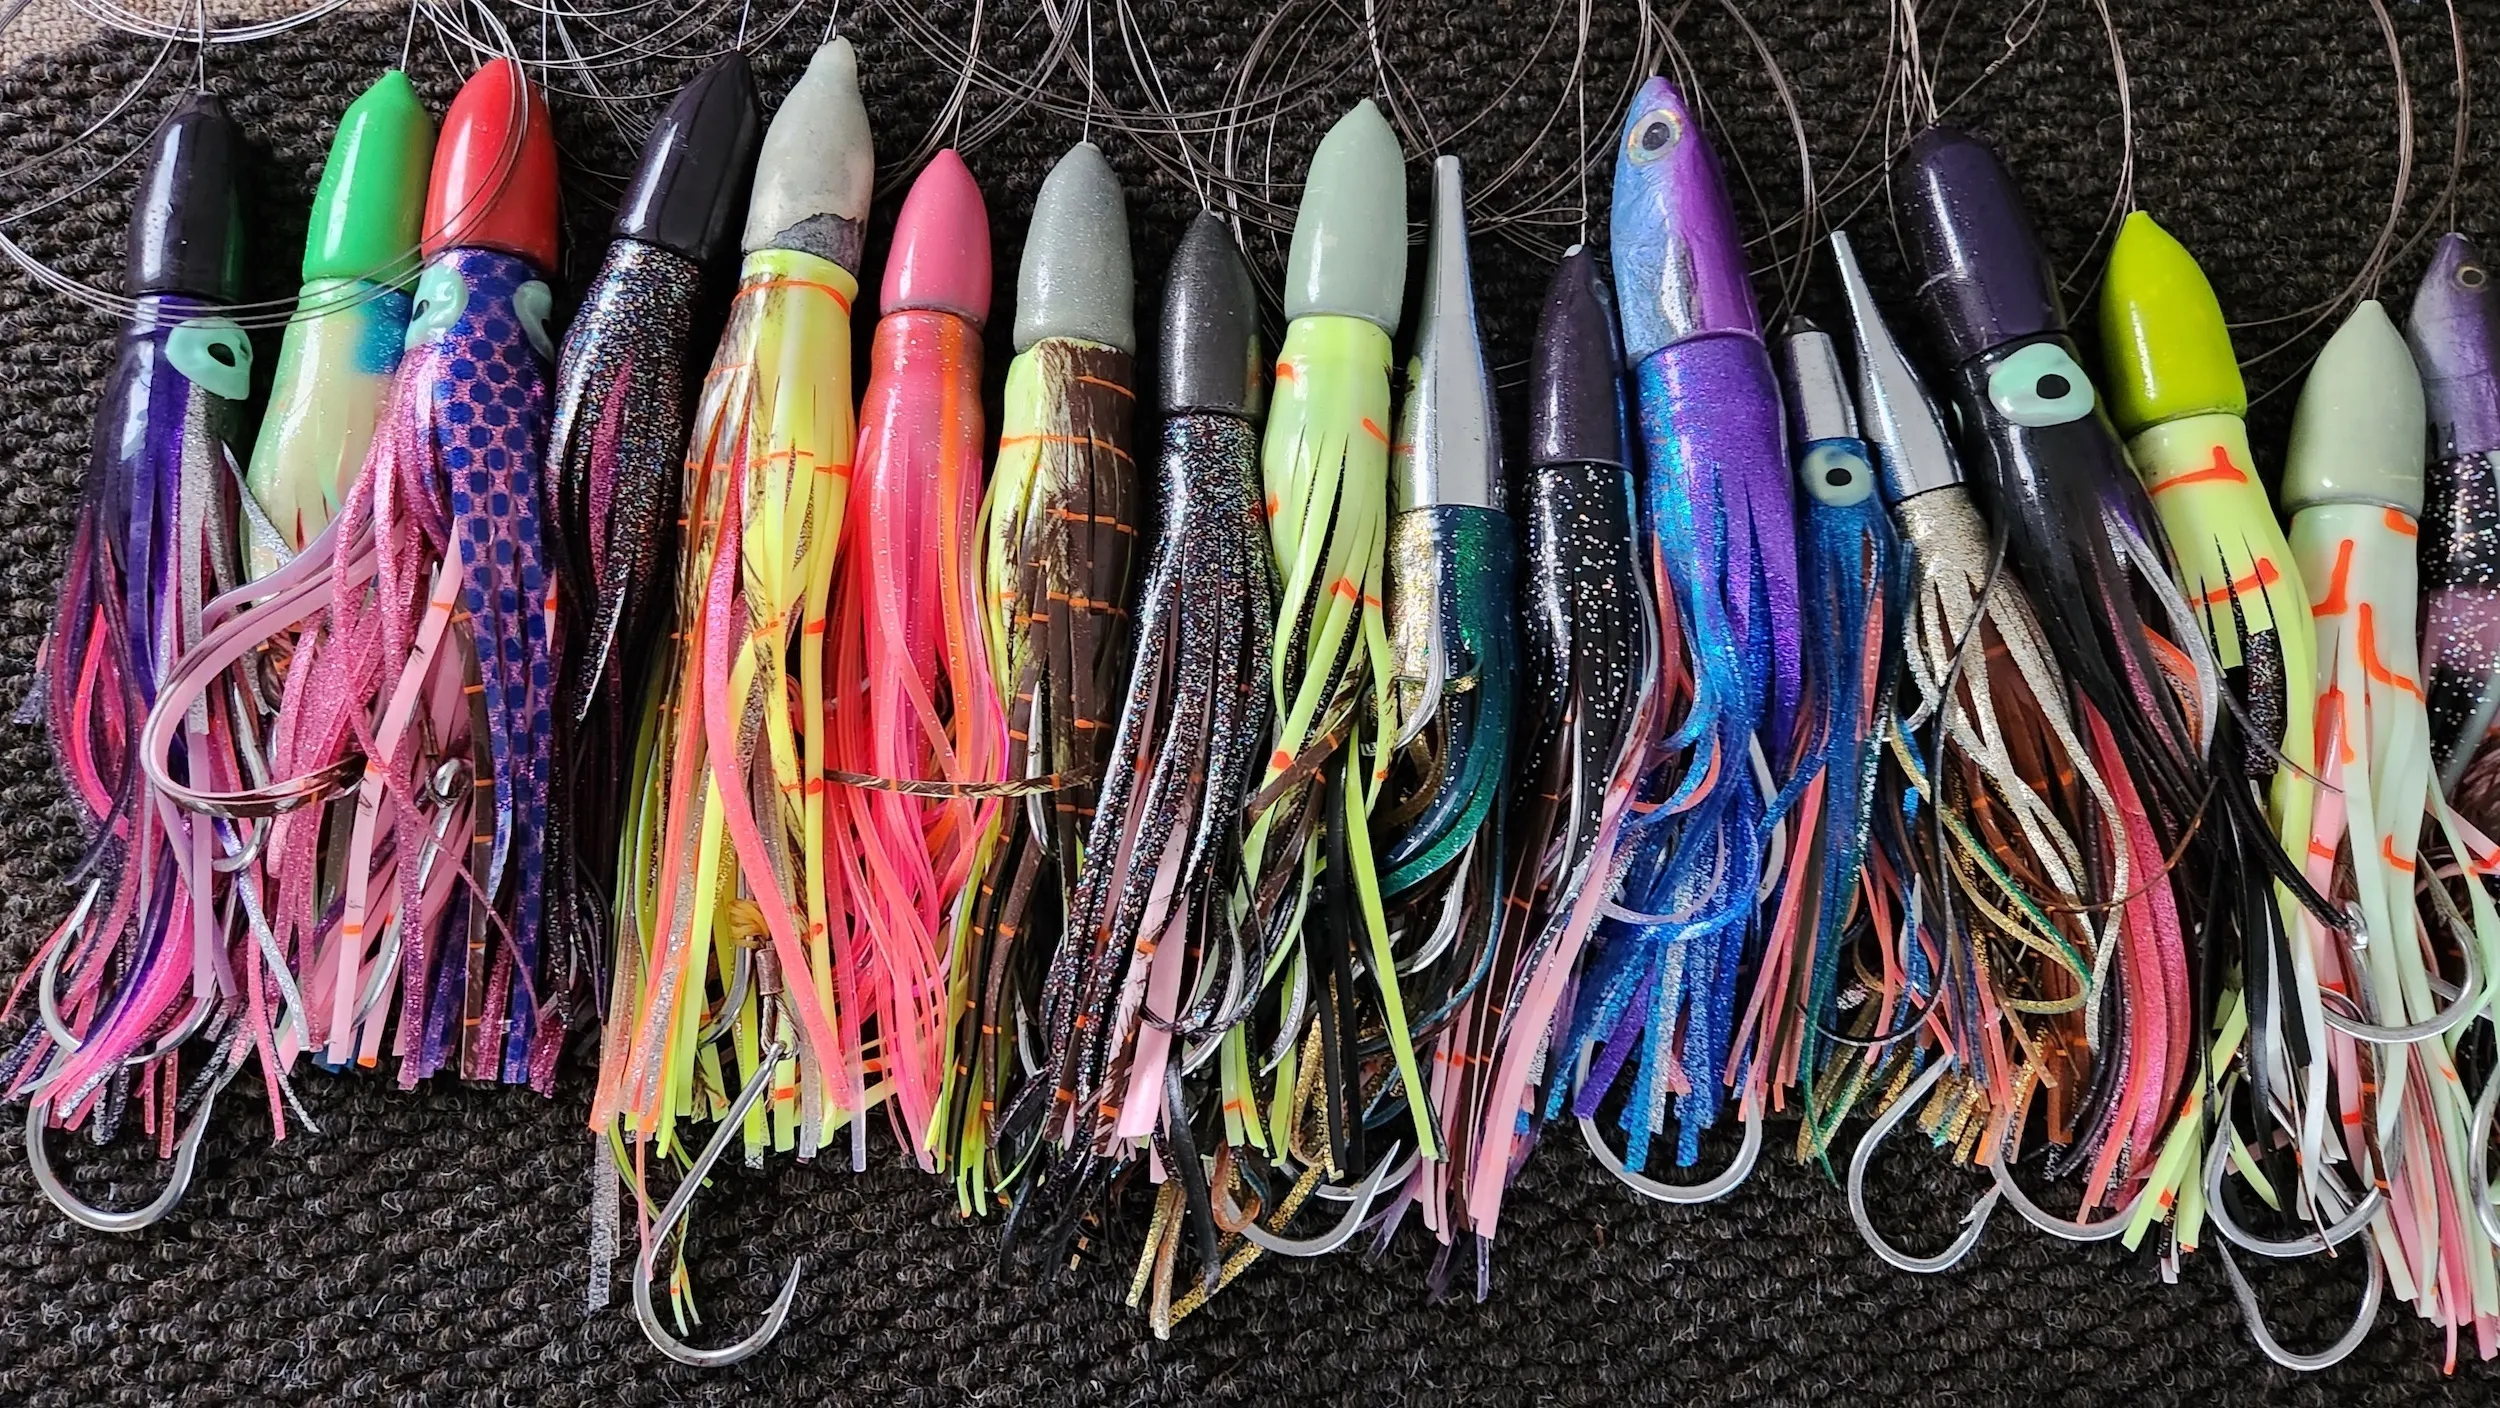 wahoo bullets rigged and ready for trolling